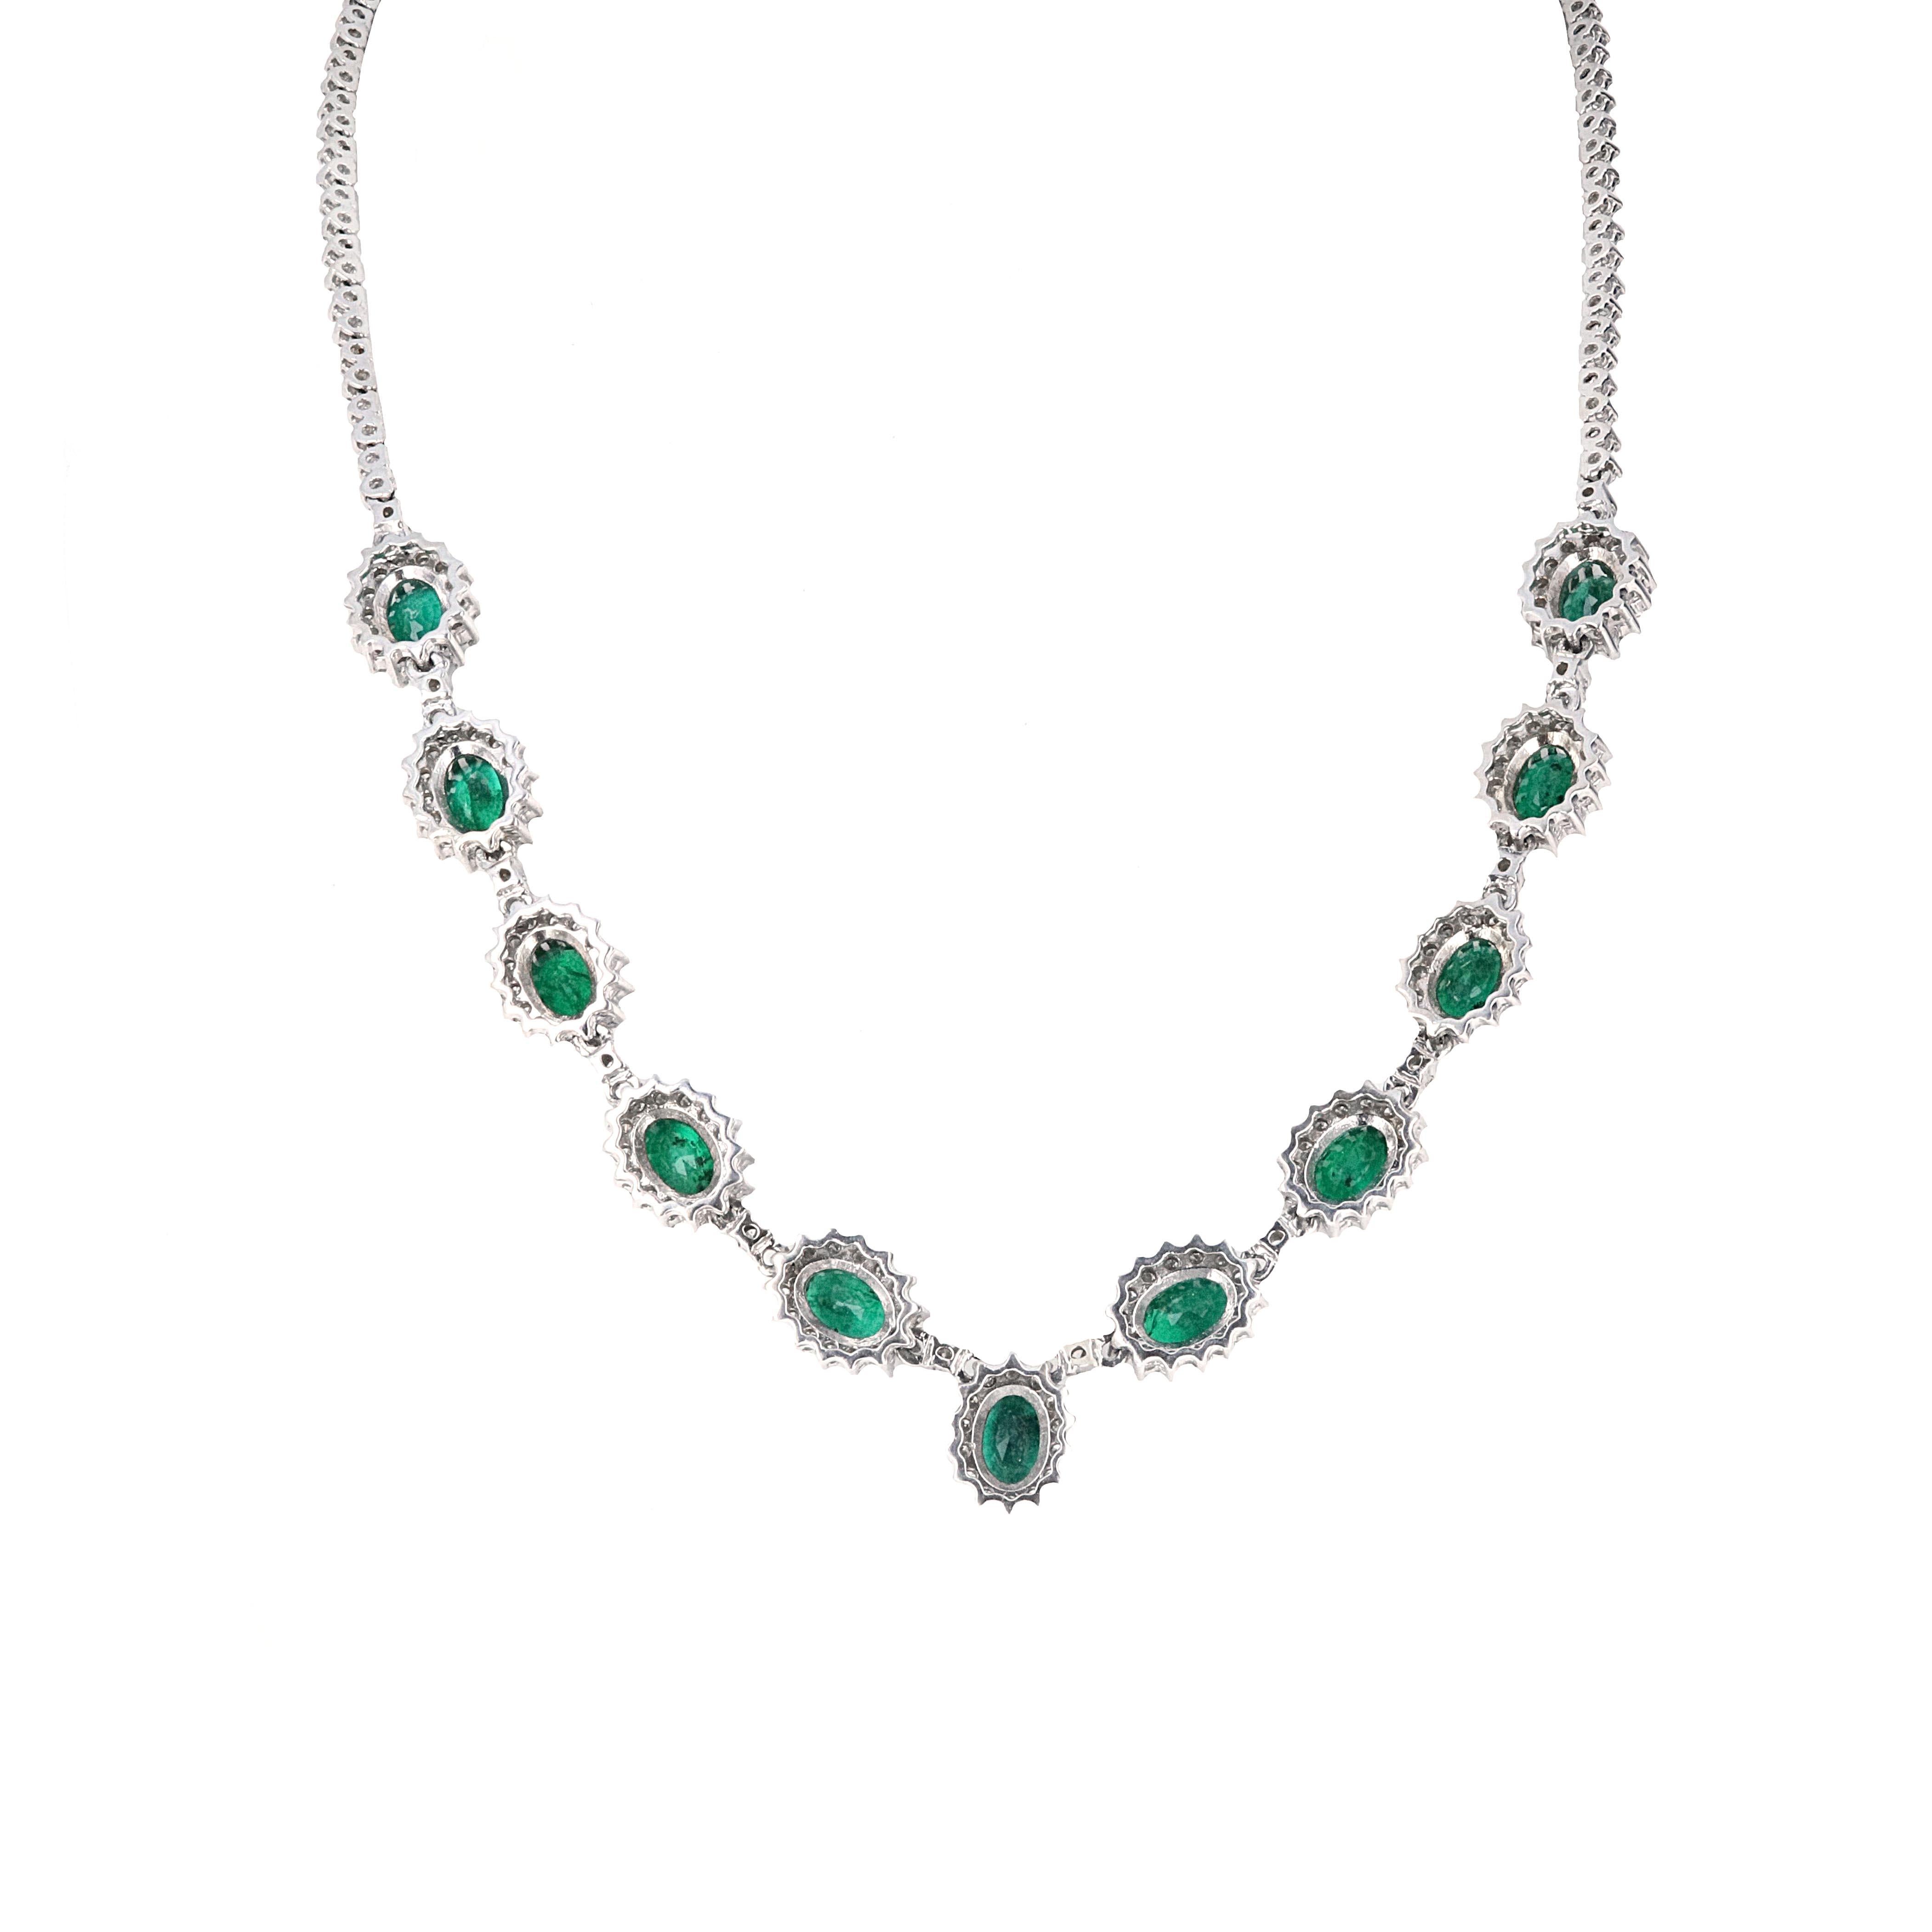 Modernist 18 Karat White Gold 6.84ct Diamond and 11ct Emerald Drop Necklace. 16 inches